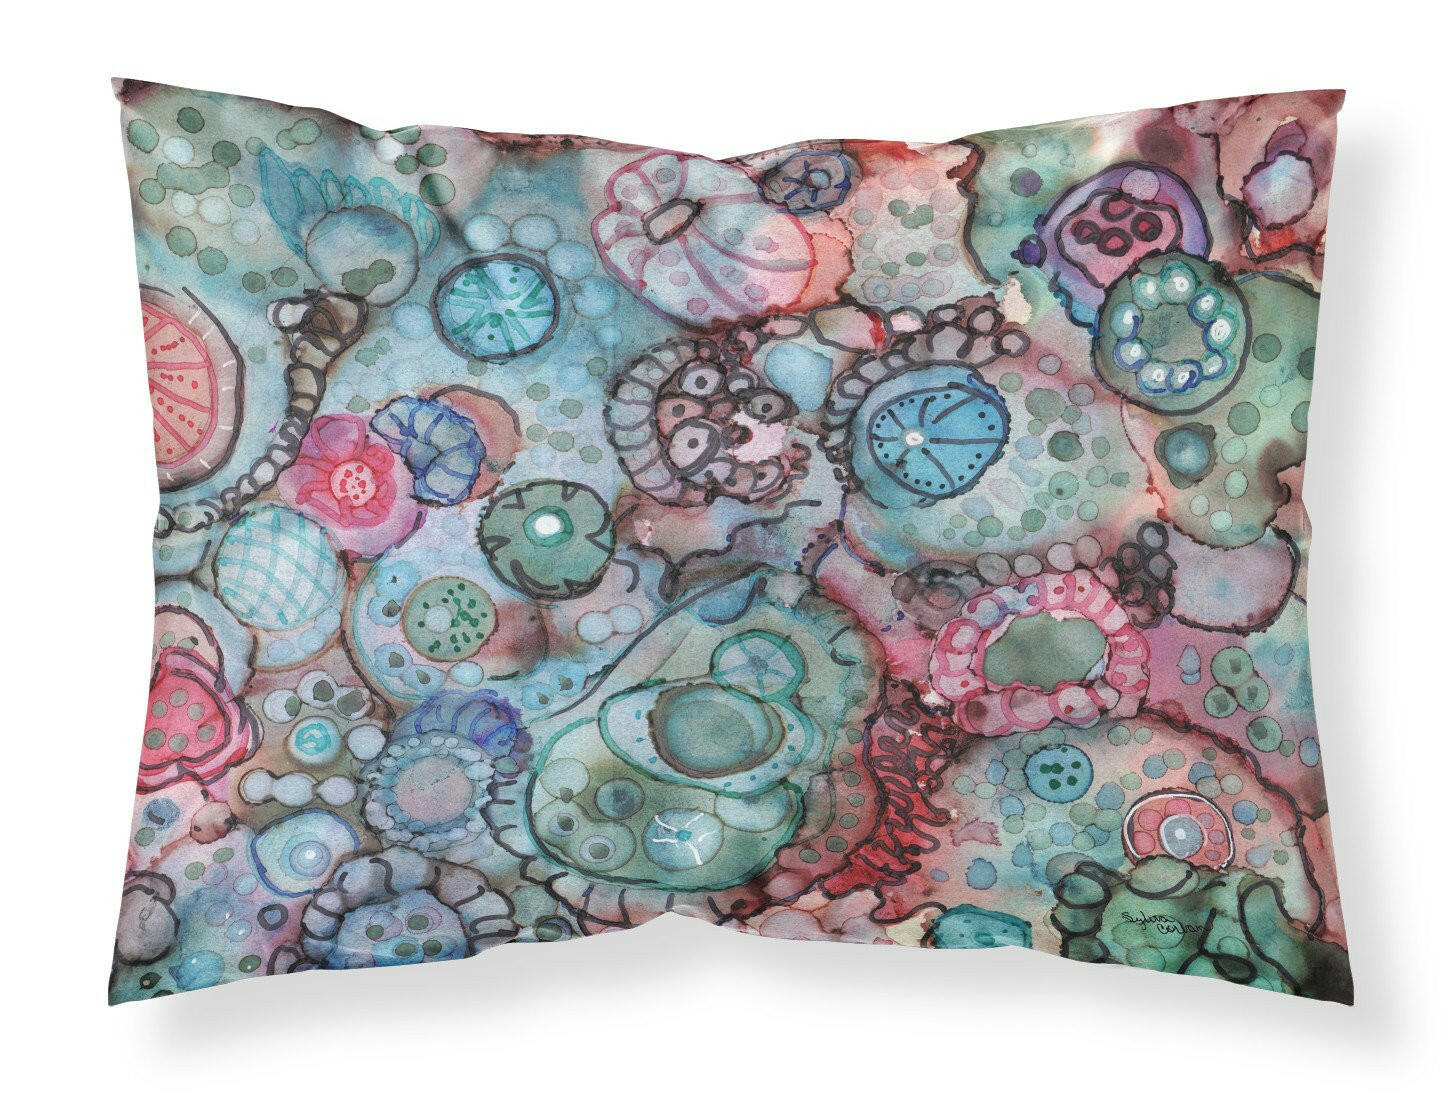 Abstract in Reds and Blues Fabric Standard Pillowcase 8982PILLOWCASE by Caroline's Treasures